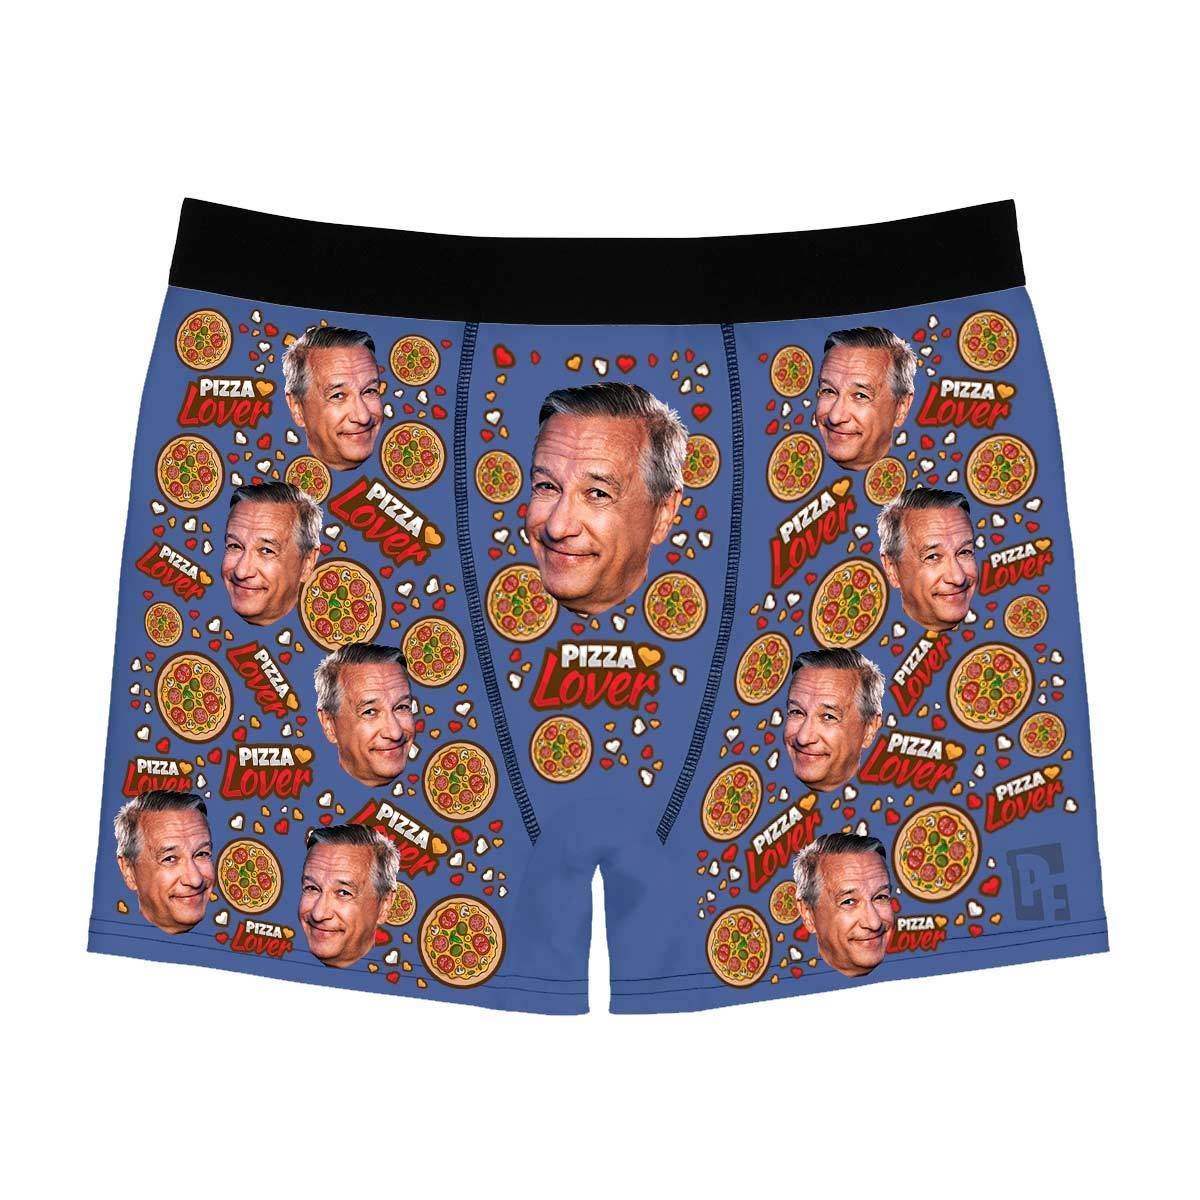 Darkblue Pizza Lover men's boxer briefs personalized with photo printed on them